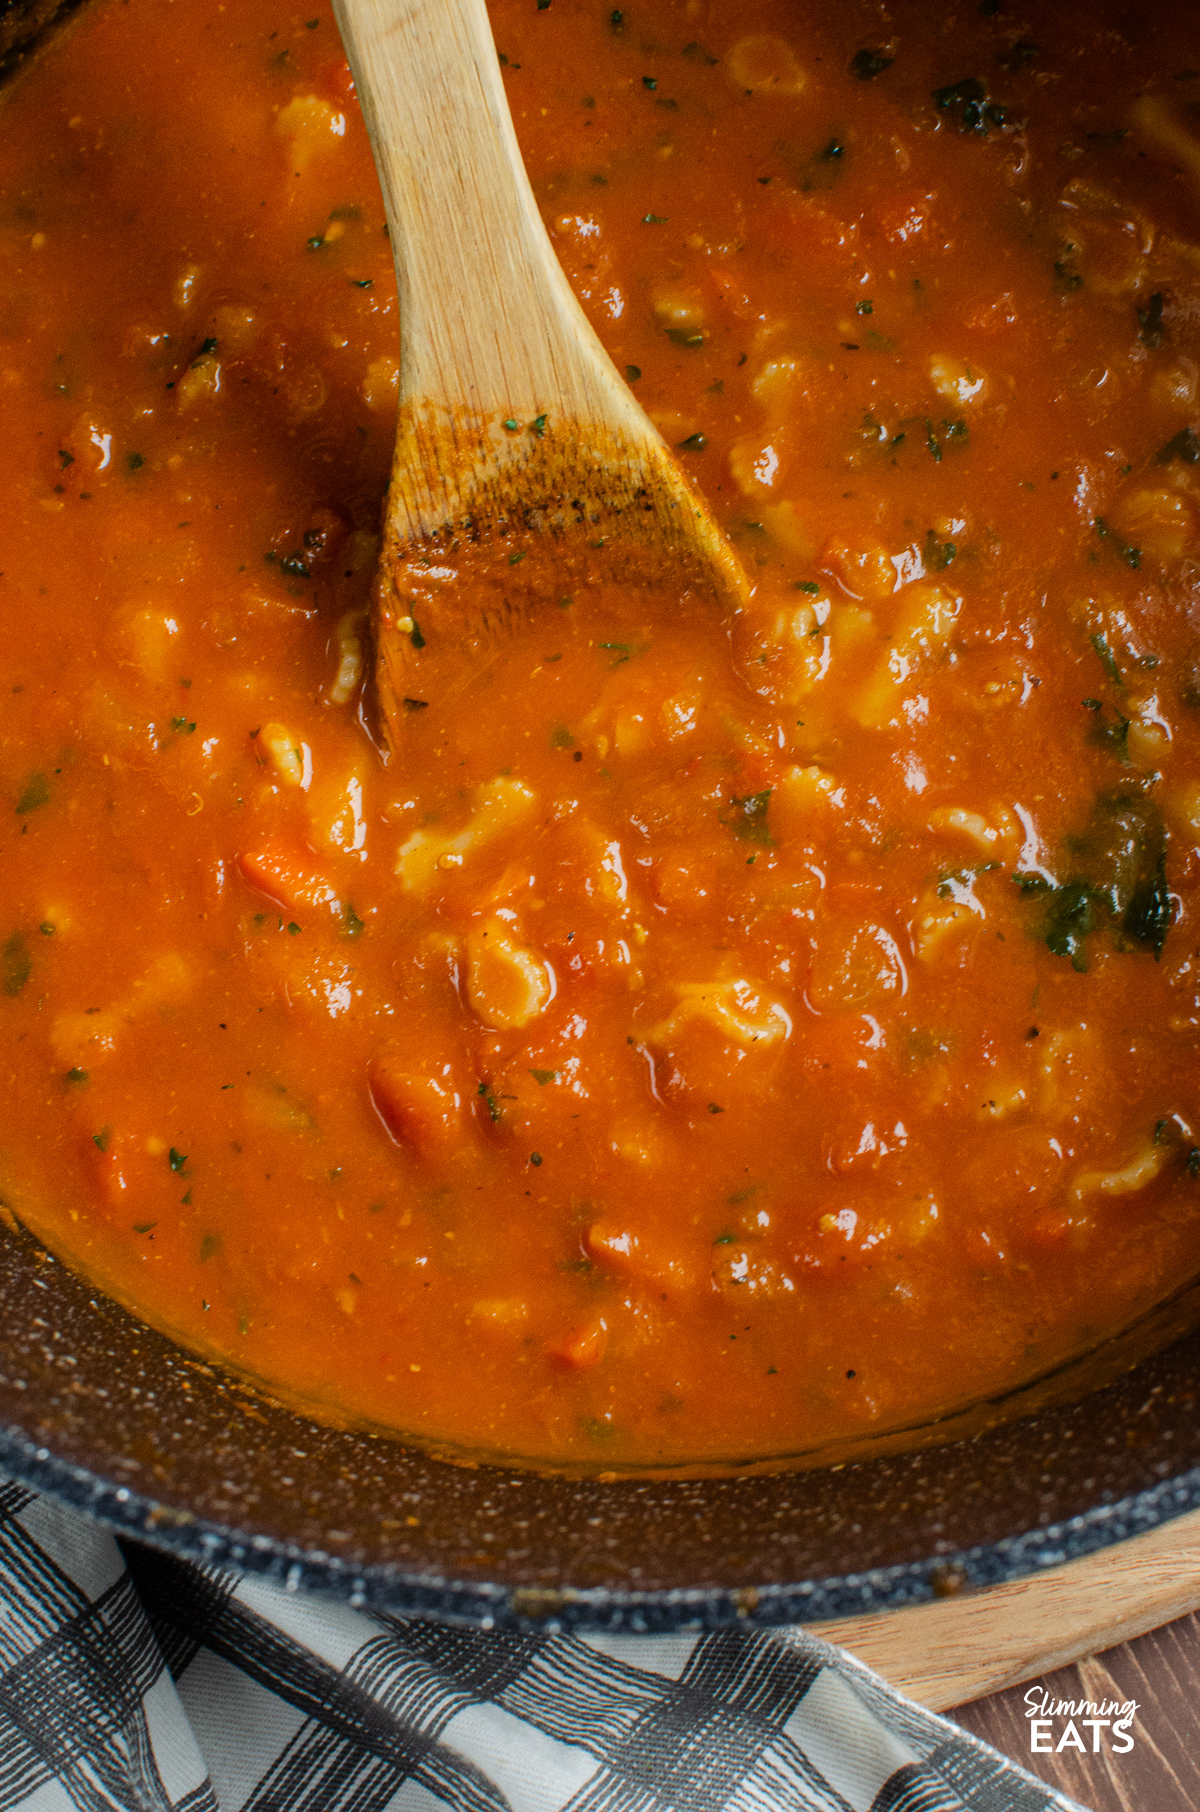 close up of A rich and vibrant tomato and pastasoup simmering in a large black ceramic non-stick saucepan, with a wooden spoon resting inside, ready for stirring.